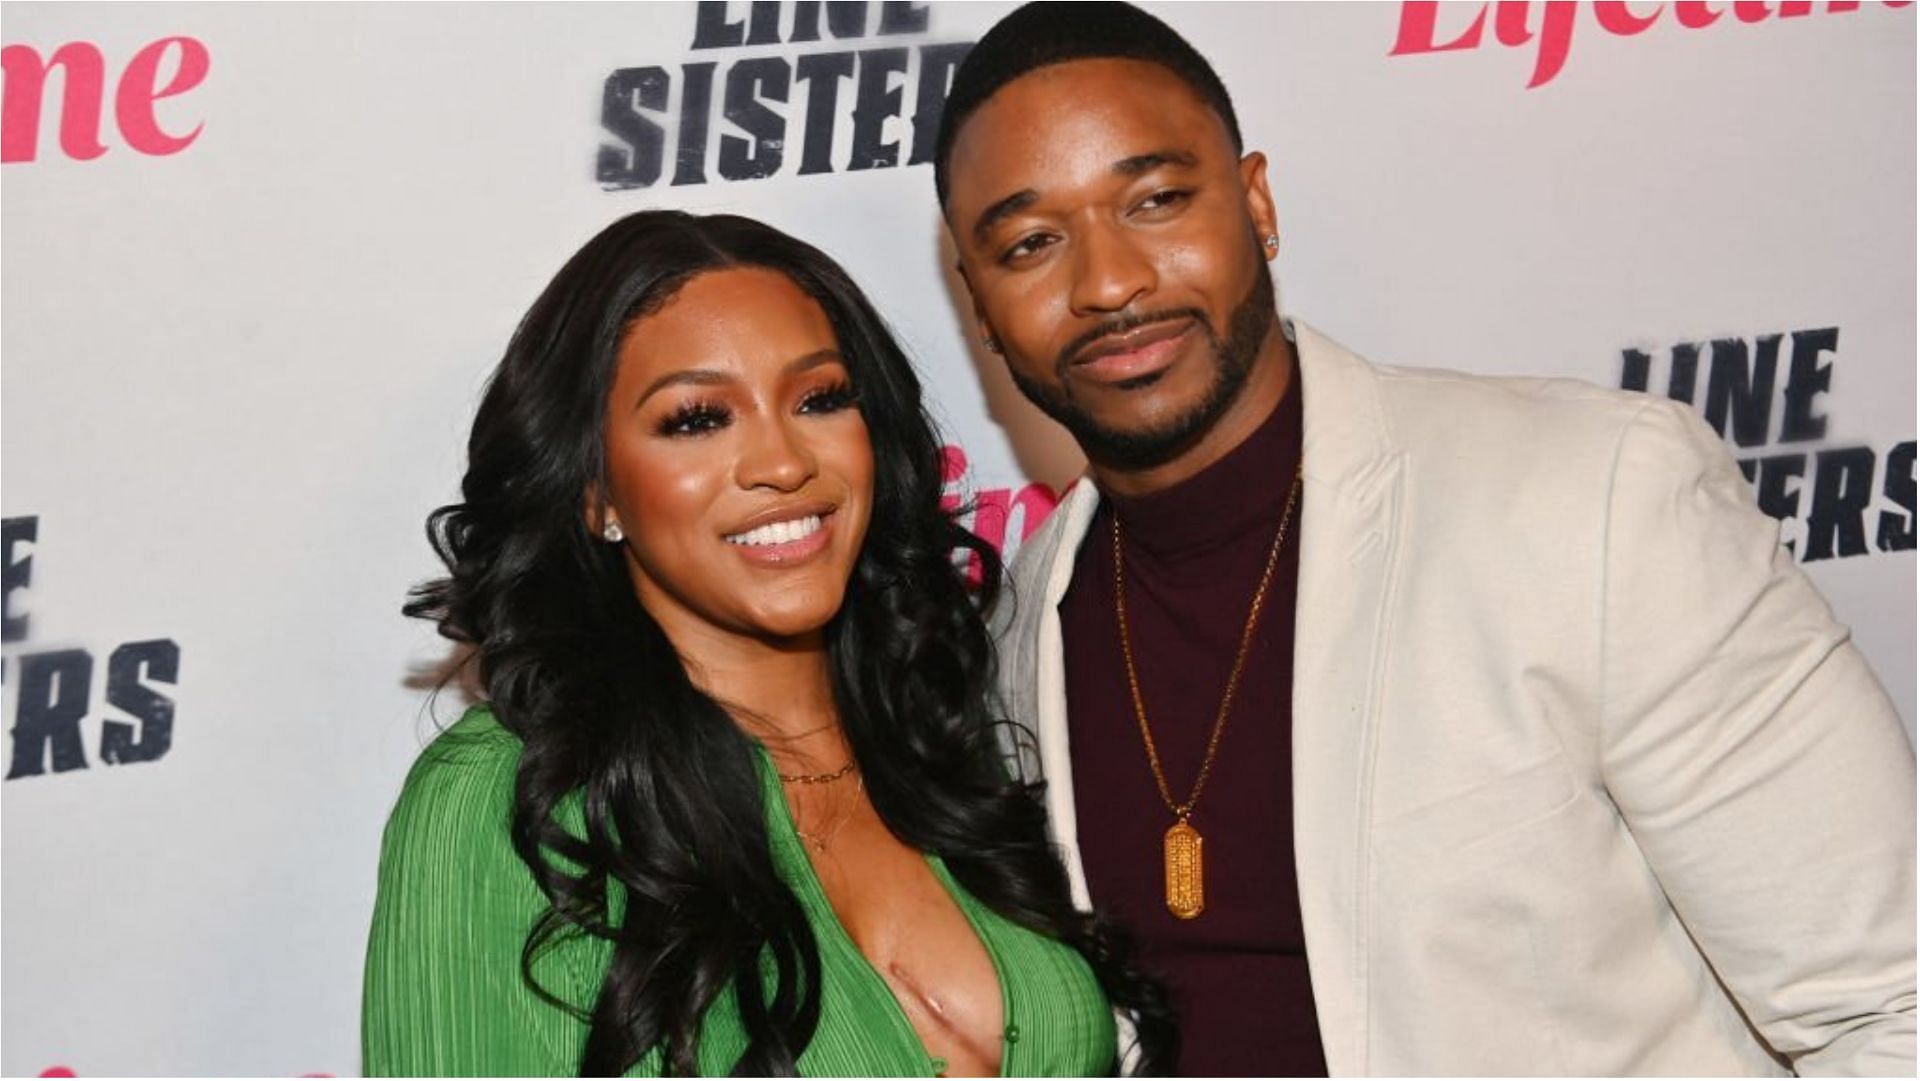 Drew Sidora and Ralph Pittman&#039;s relationship problems were featured in RHOA (Image via Paras Griffin/Getty Images)